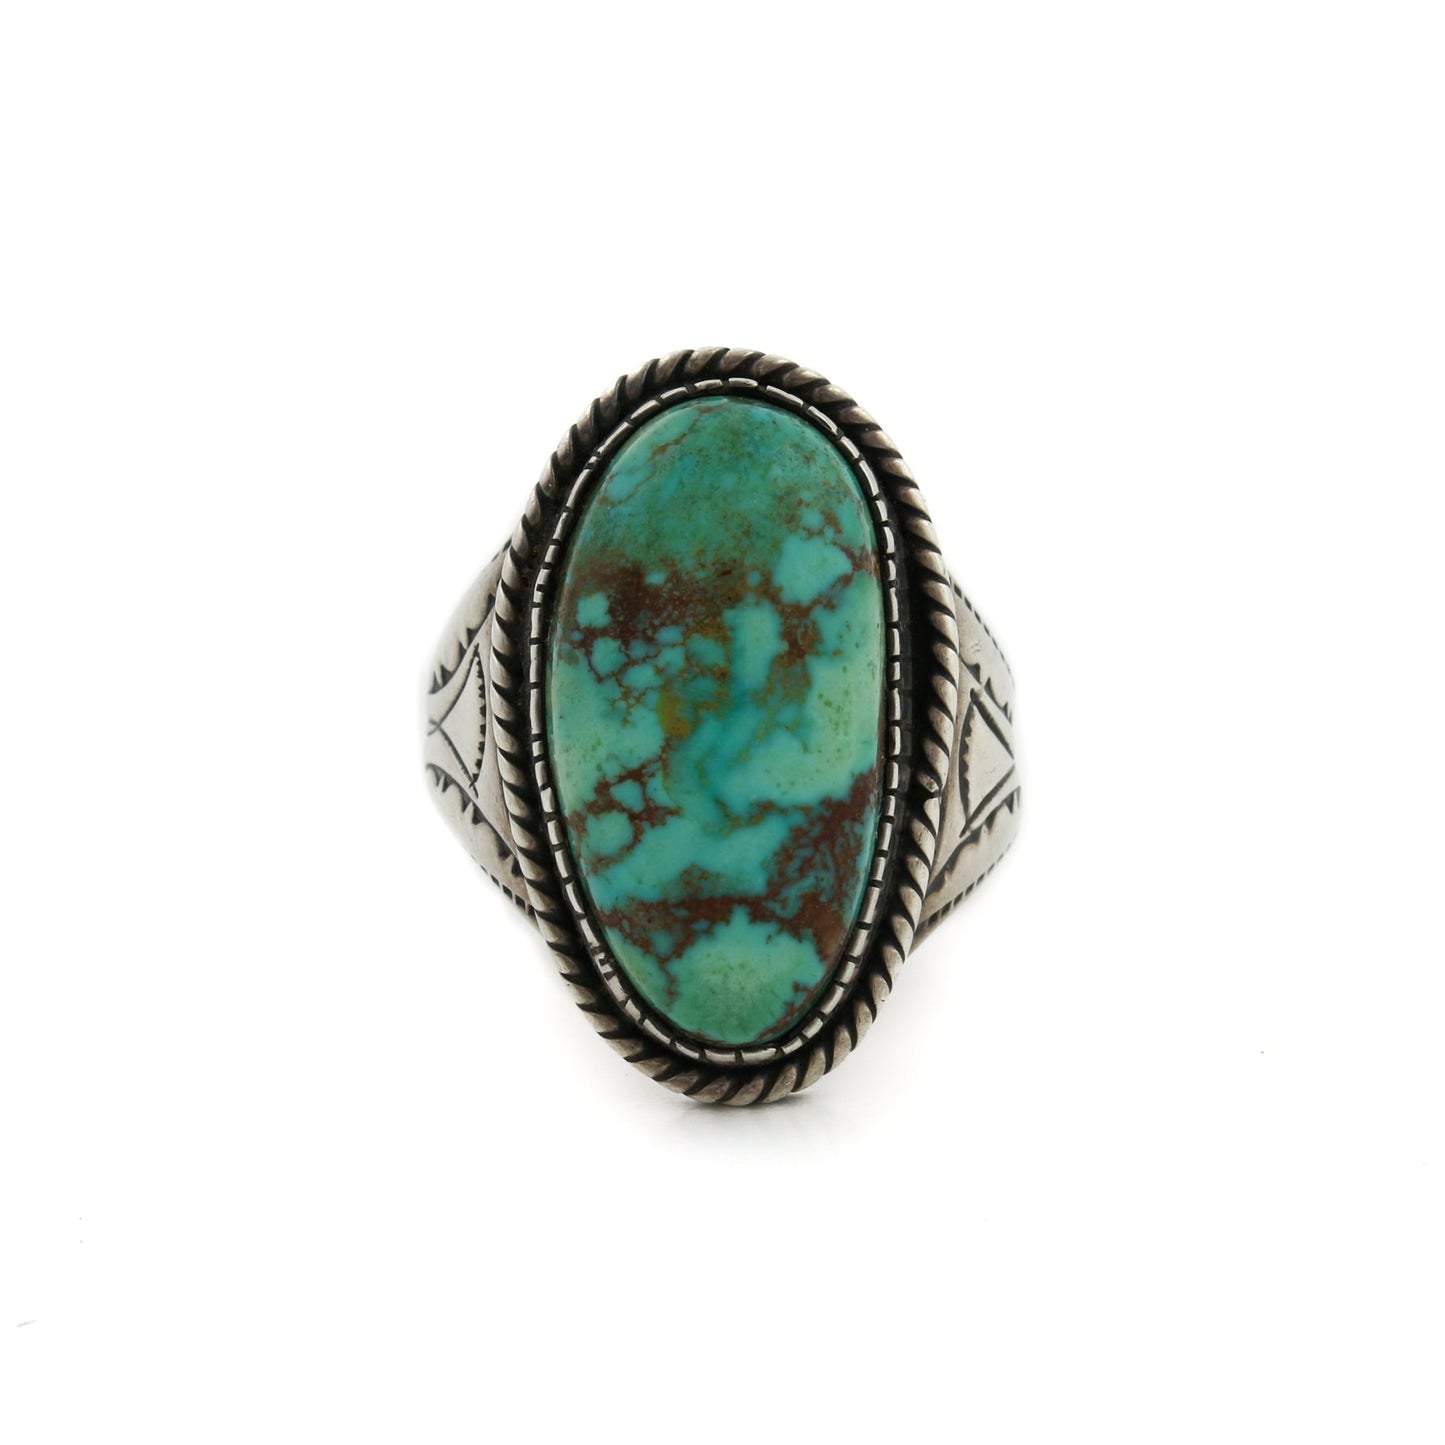 Hand-Hammered "Tom Willeto" x Green Turquoise Navajo Ring - Kingdom Jewelry